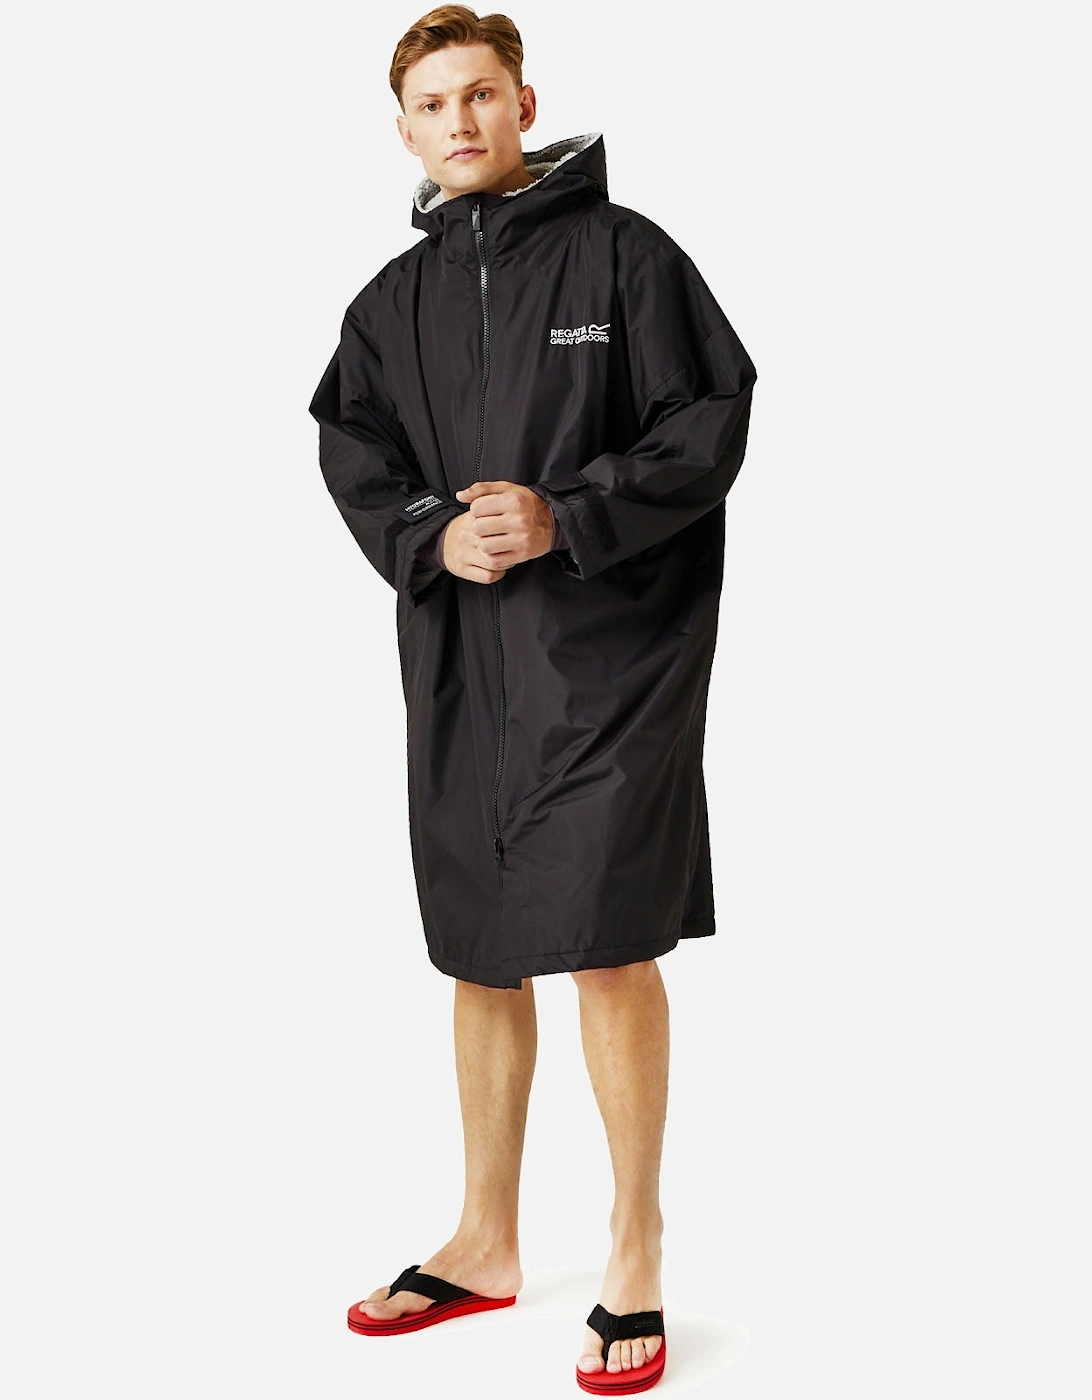 Outdoor Active Adults Waterproof Changing Robe, 156 of 155